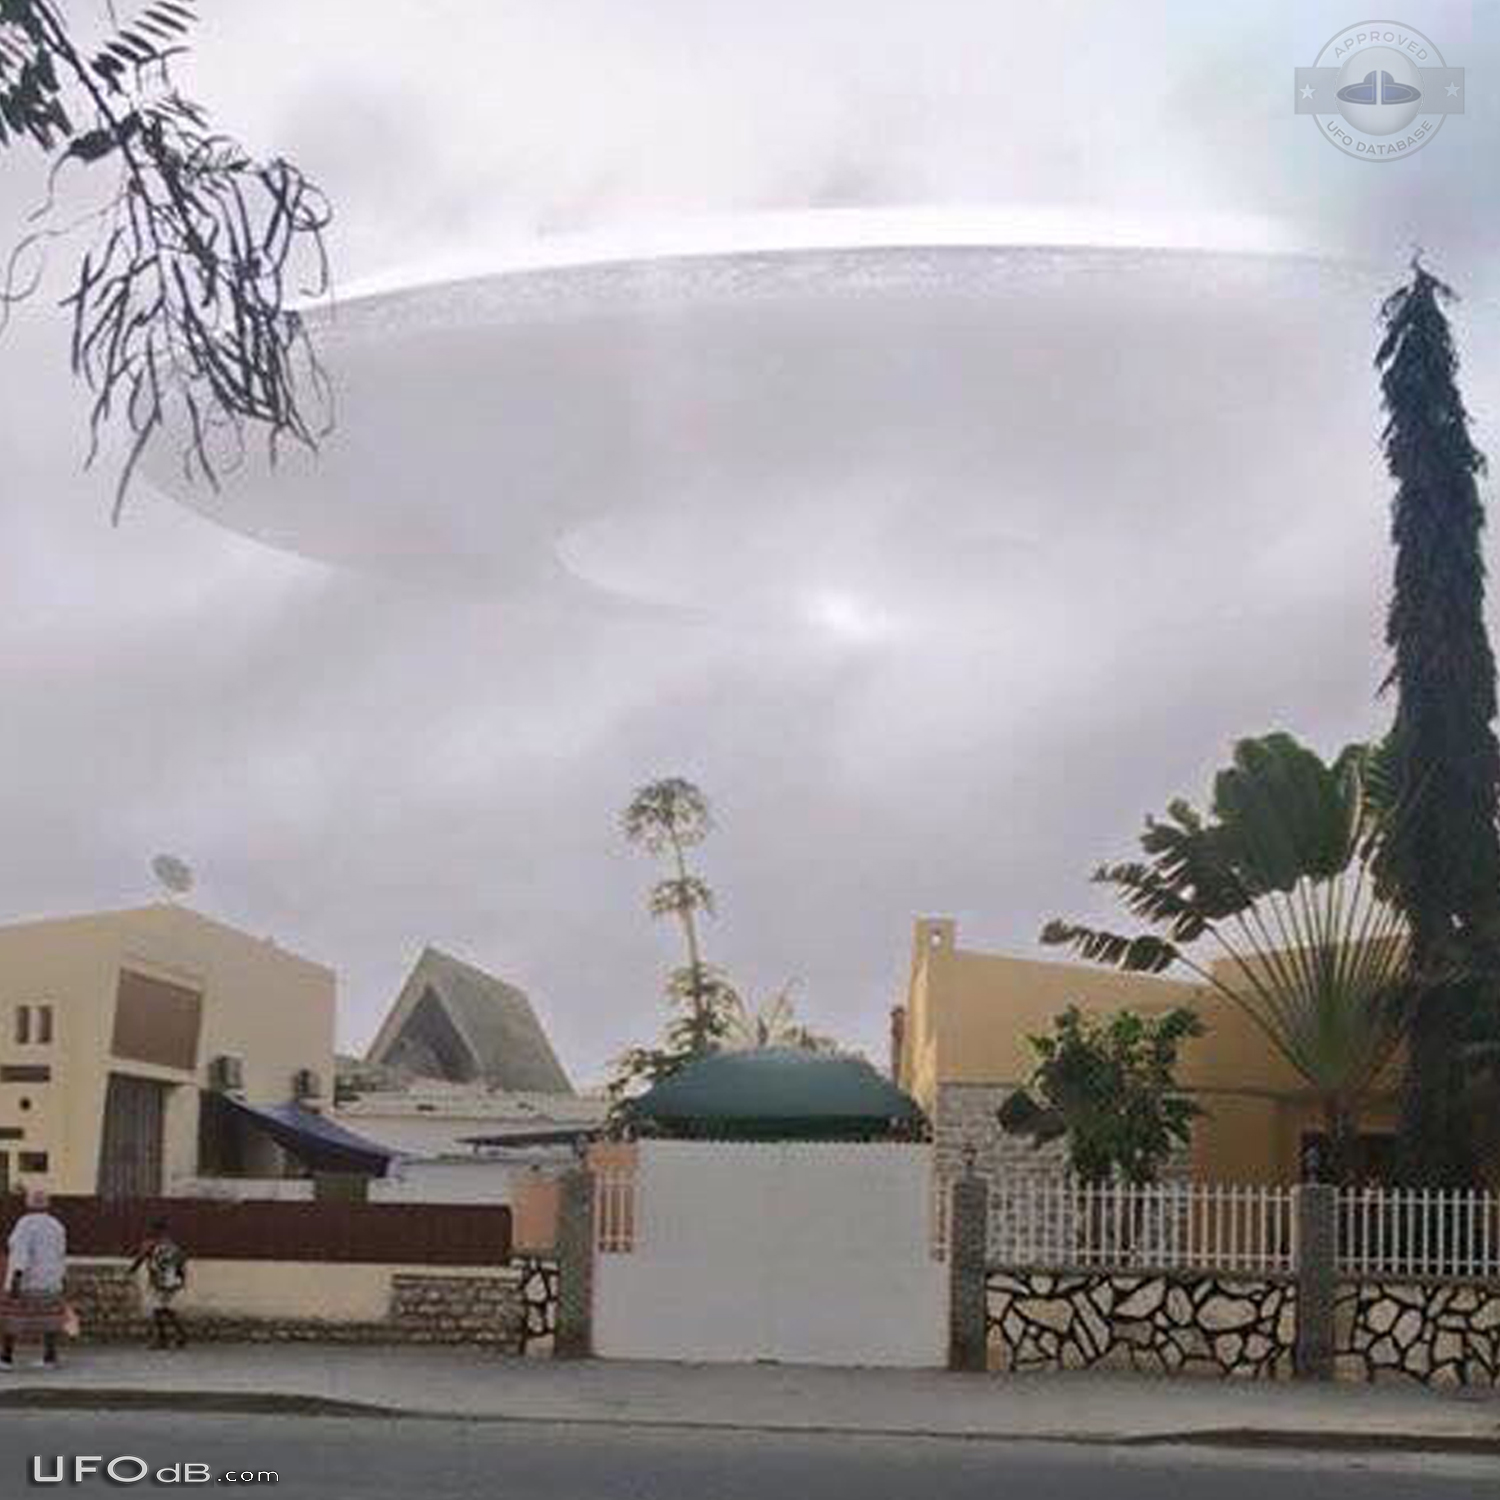 Angola people UFO Sighting seen in the pics kind of spaceship Benguela UFO Picture #738-3